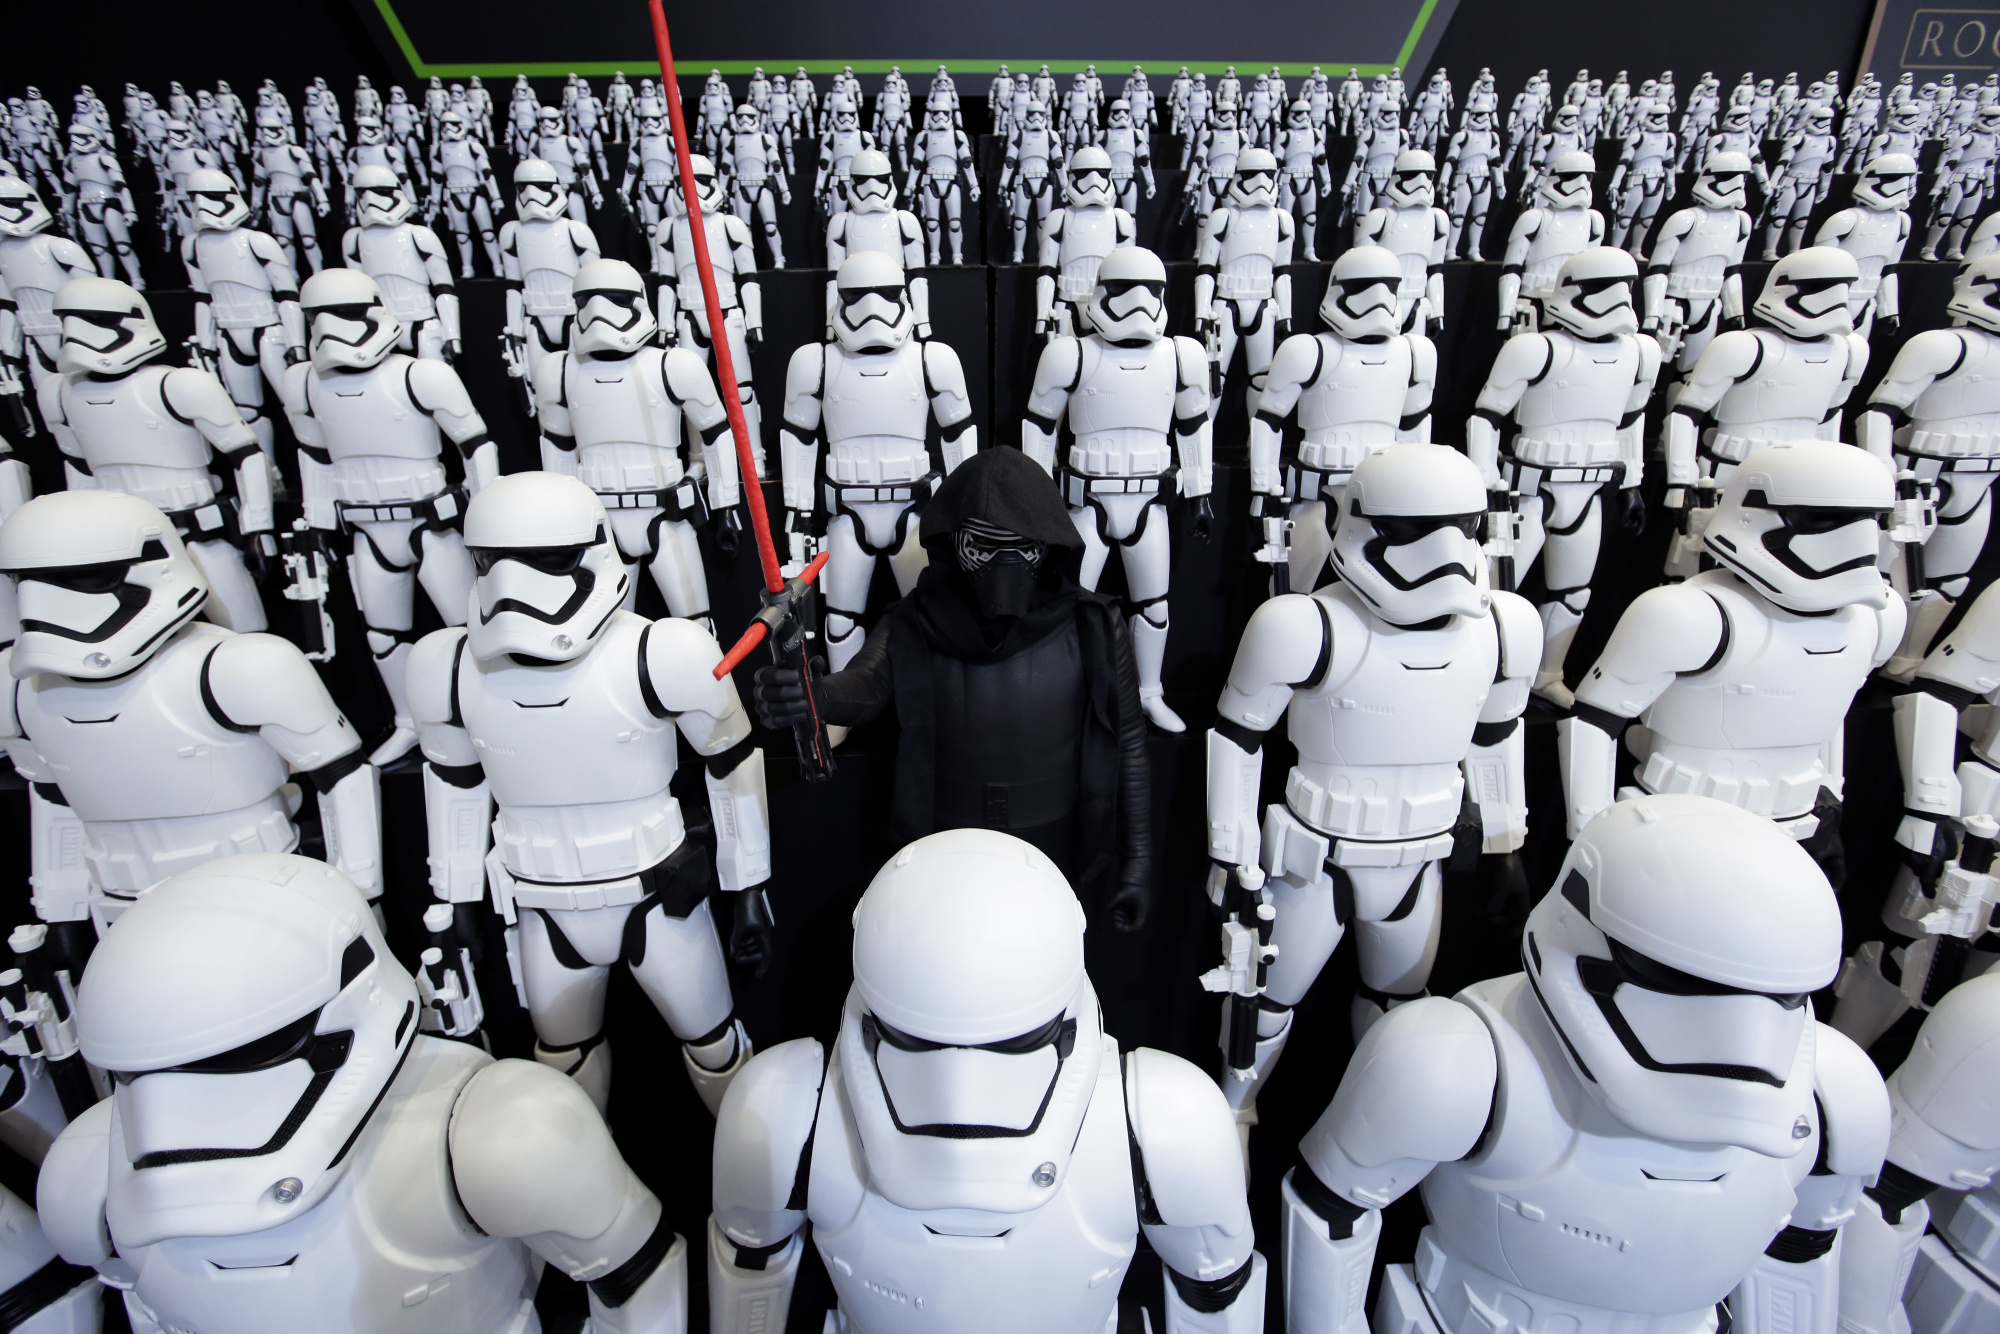 Figurines of Kylo Ren, center, and First Order Stormtroopers, characters from &quot;Star Wars&quot;, are displayed at the Tomy Co. booth at the International Tokyo Toy Show in Tokyo, Japan, on Thursday, June 9, 2016. The toy show will run though June 12 at the Tokyo International Exhibition Center.